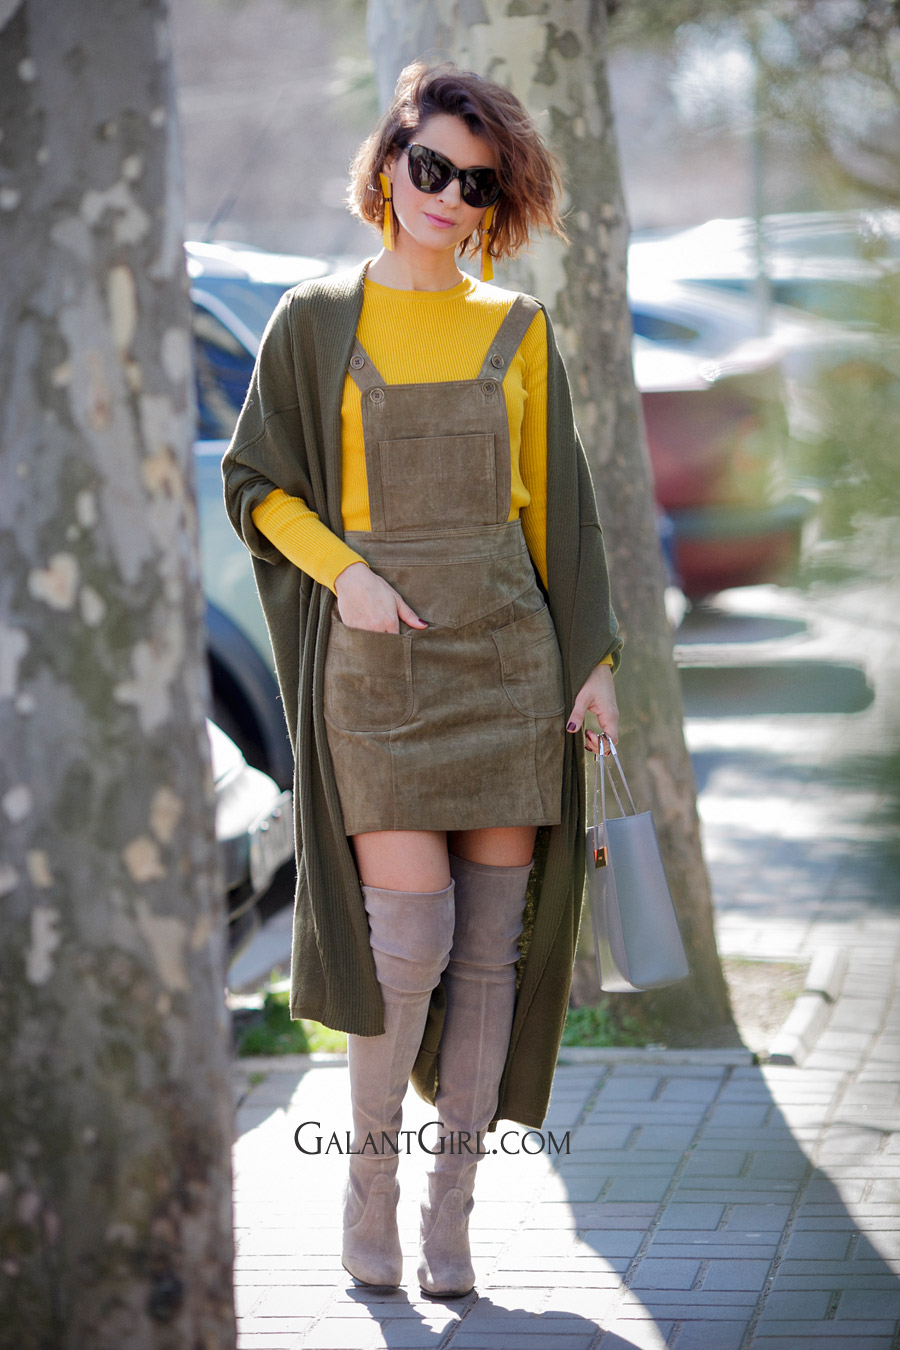 pinafore dress, suede OTK boots outfits, chic spring outfits, Ellena Galant Girl, 